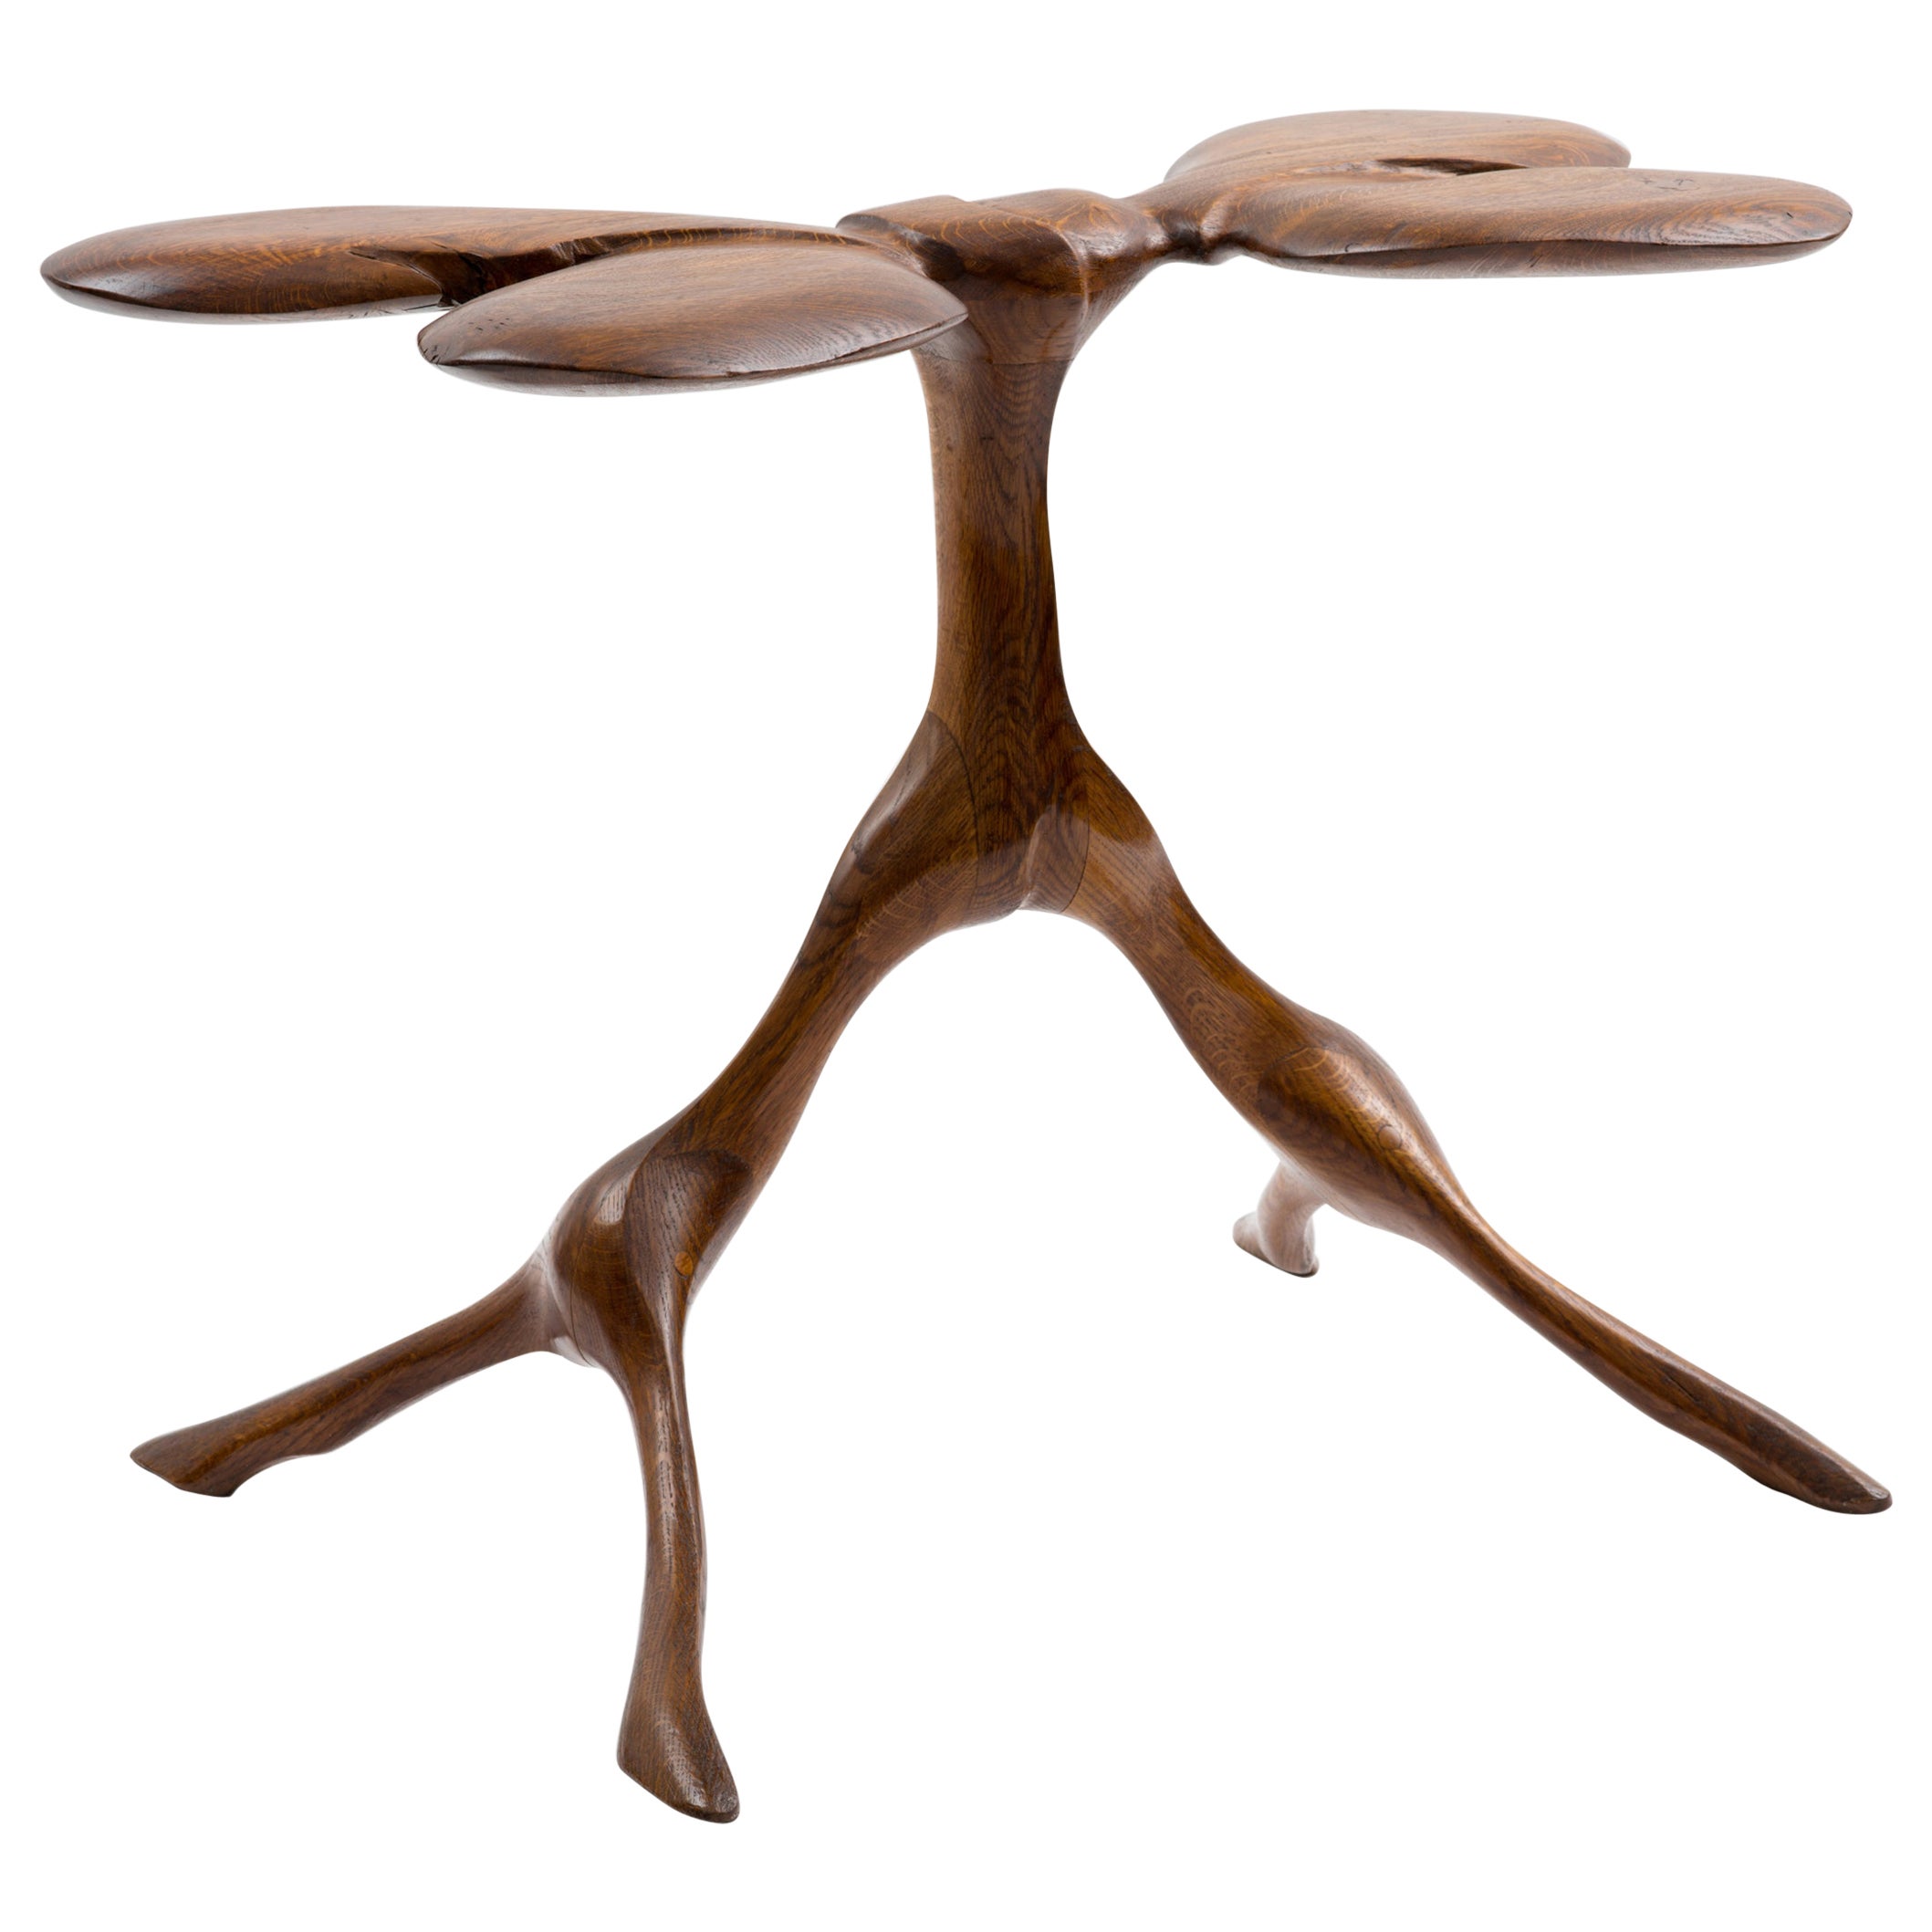 American Studio Movement Sculptural Dragonfly Table by Andrew J Willner, 1973 For Sale